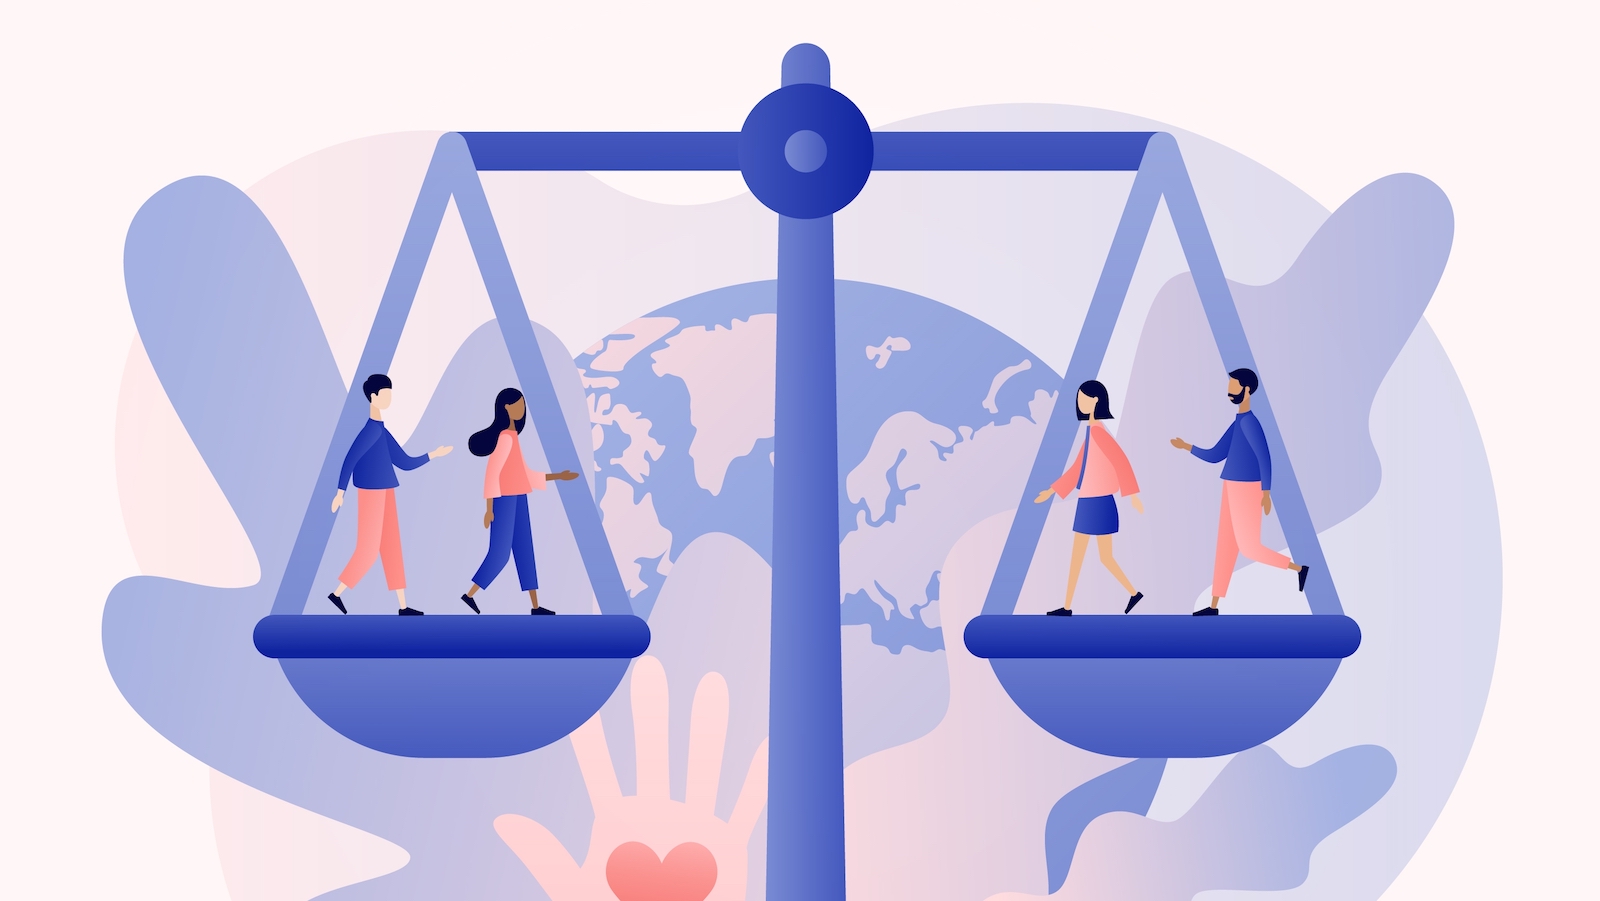 Illustration of social justice concept with people standing on both sides of justice scales